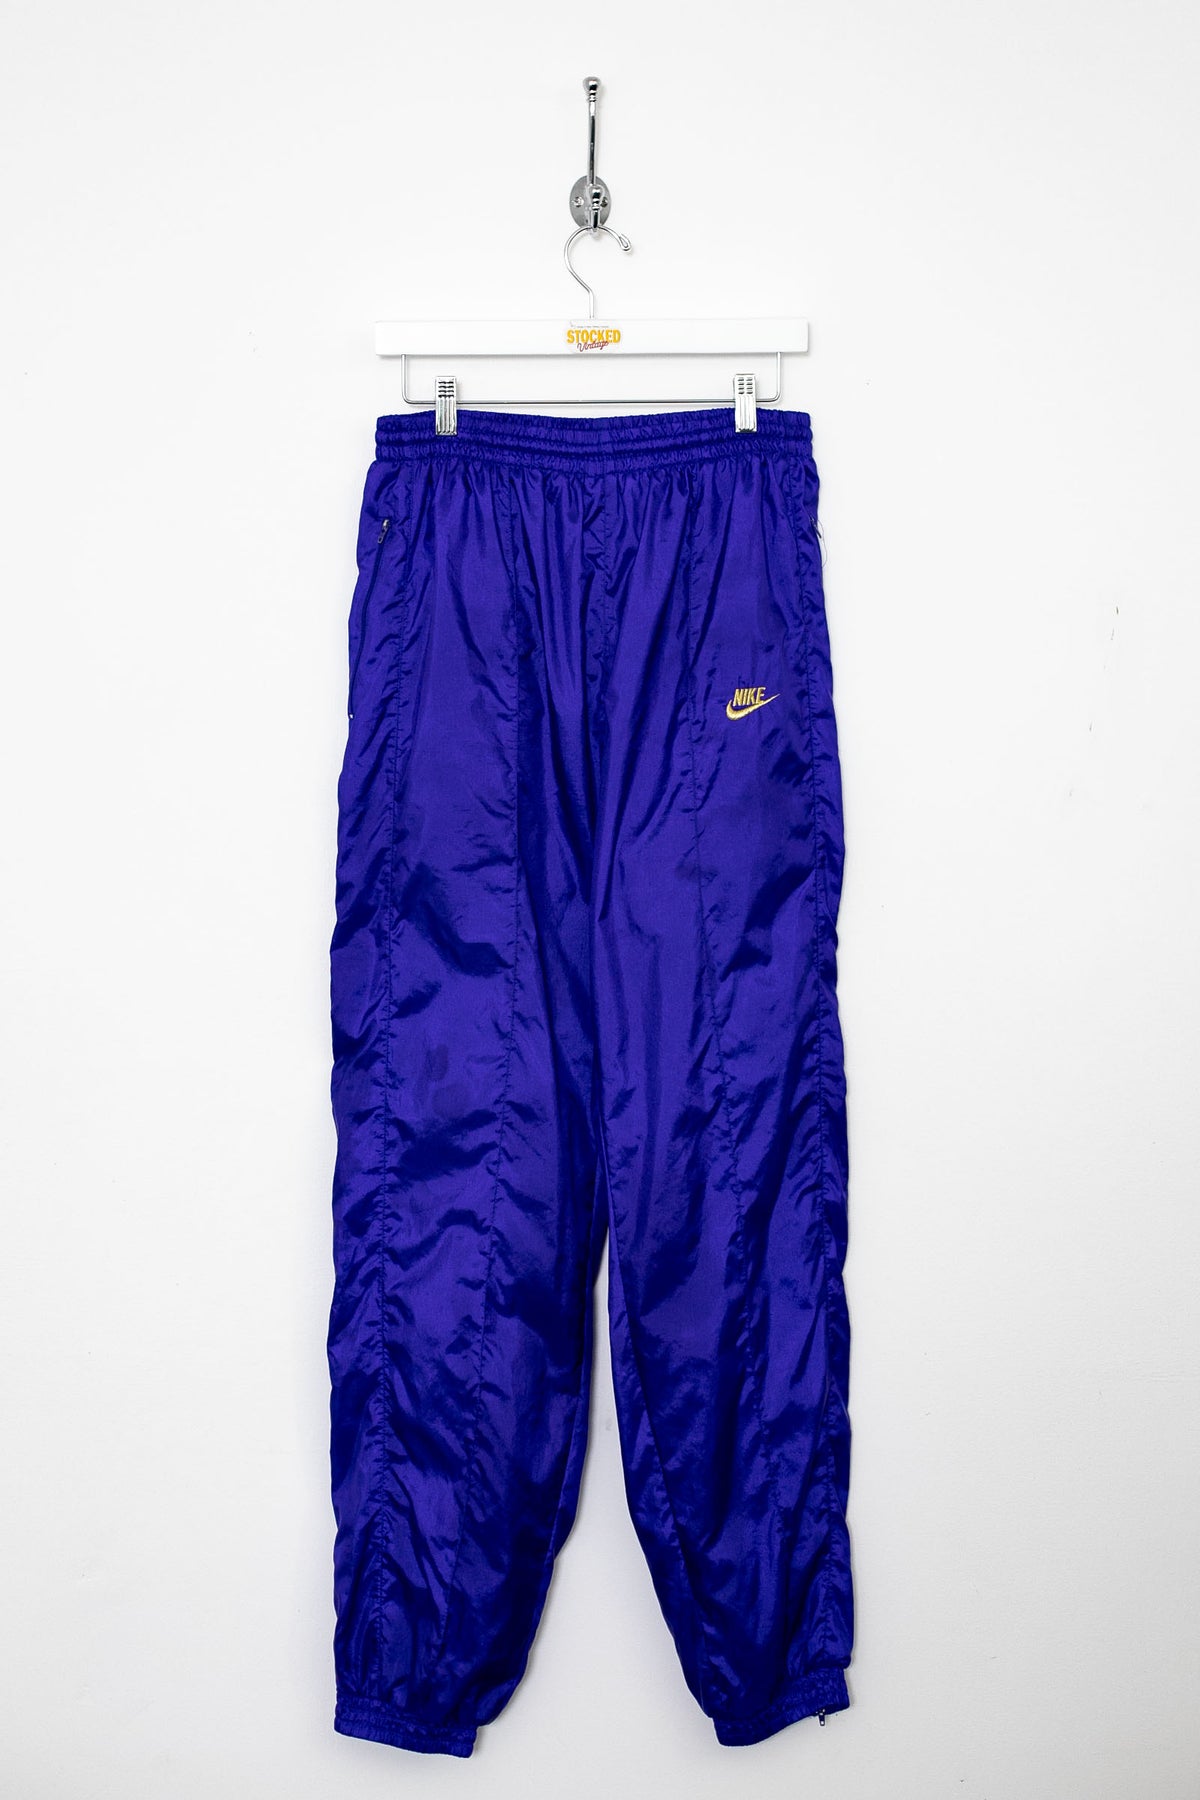 90s Nike Tracksuit Bottoms (M)